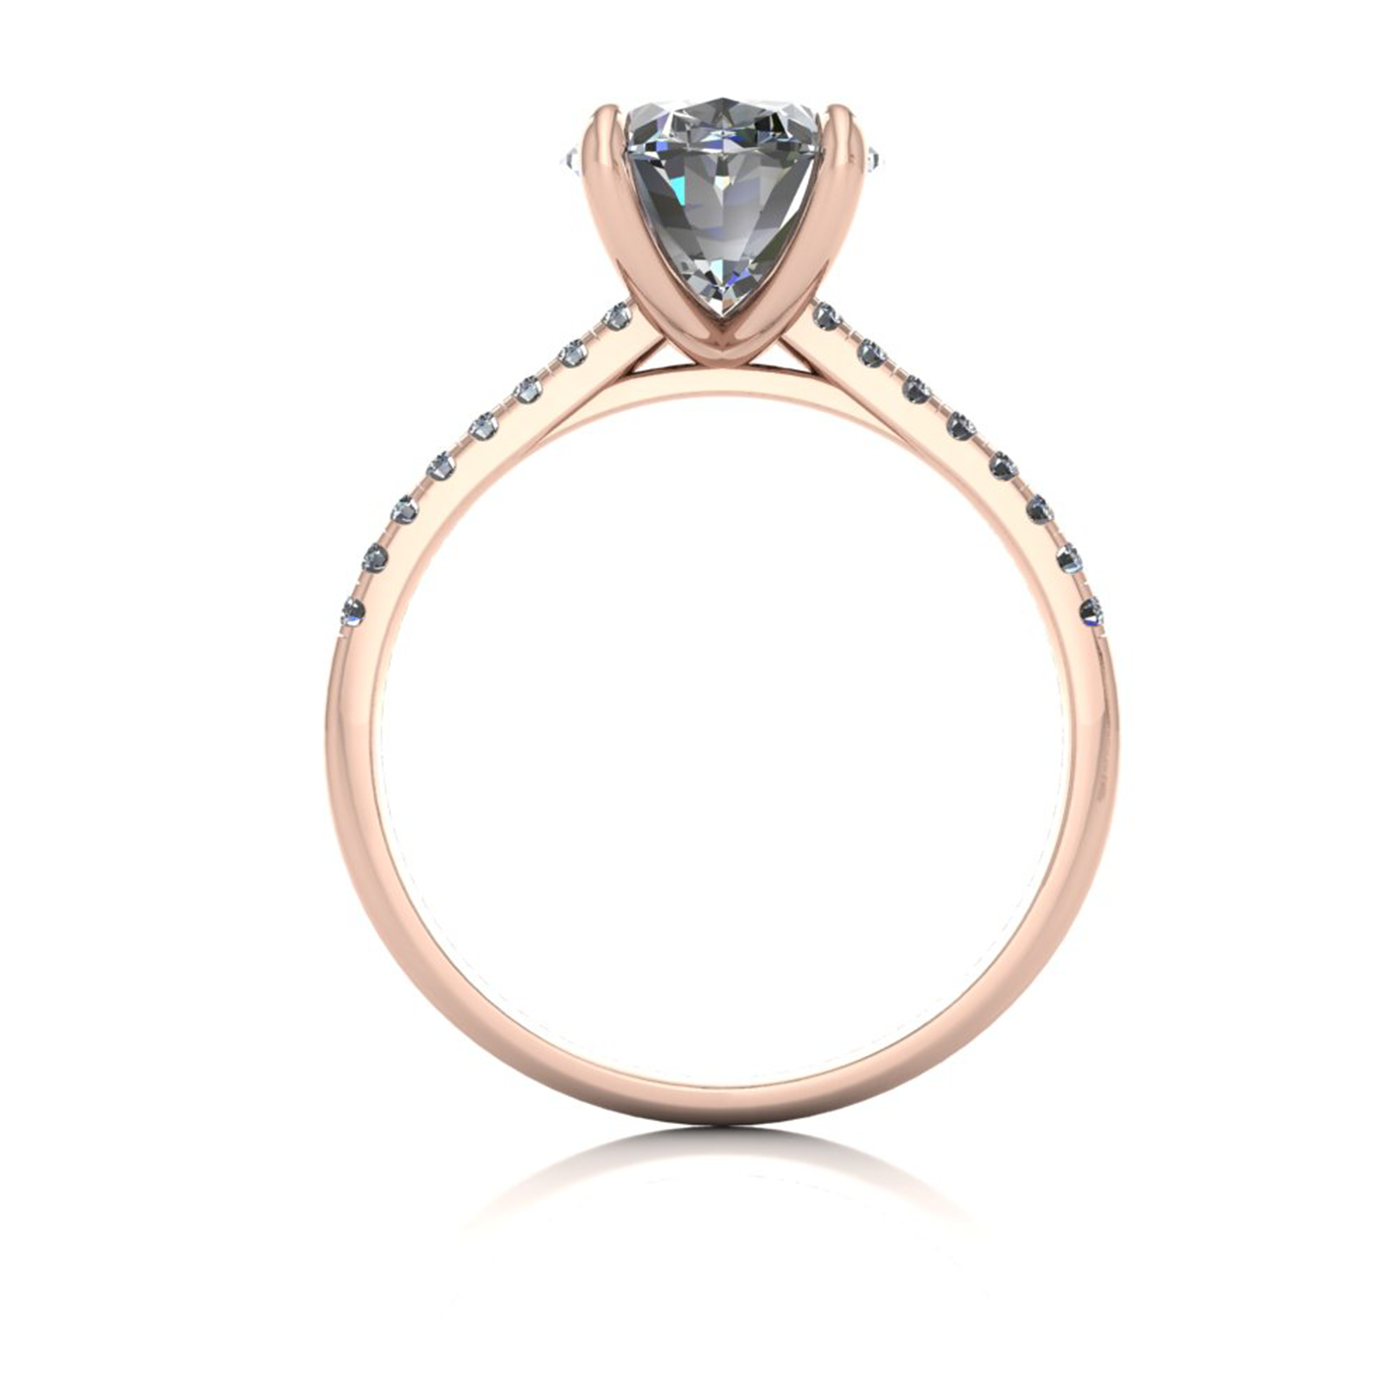 18k rose gold  2,50 ct 4 prongs oval cut diamond engagement ring with whisper thin pavÉ set band